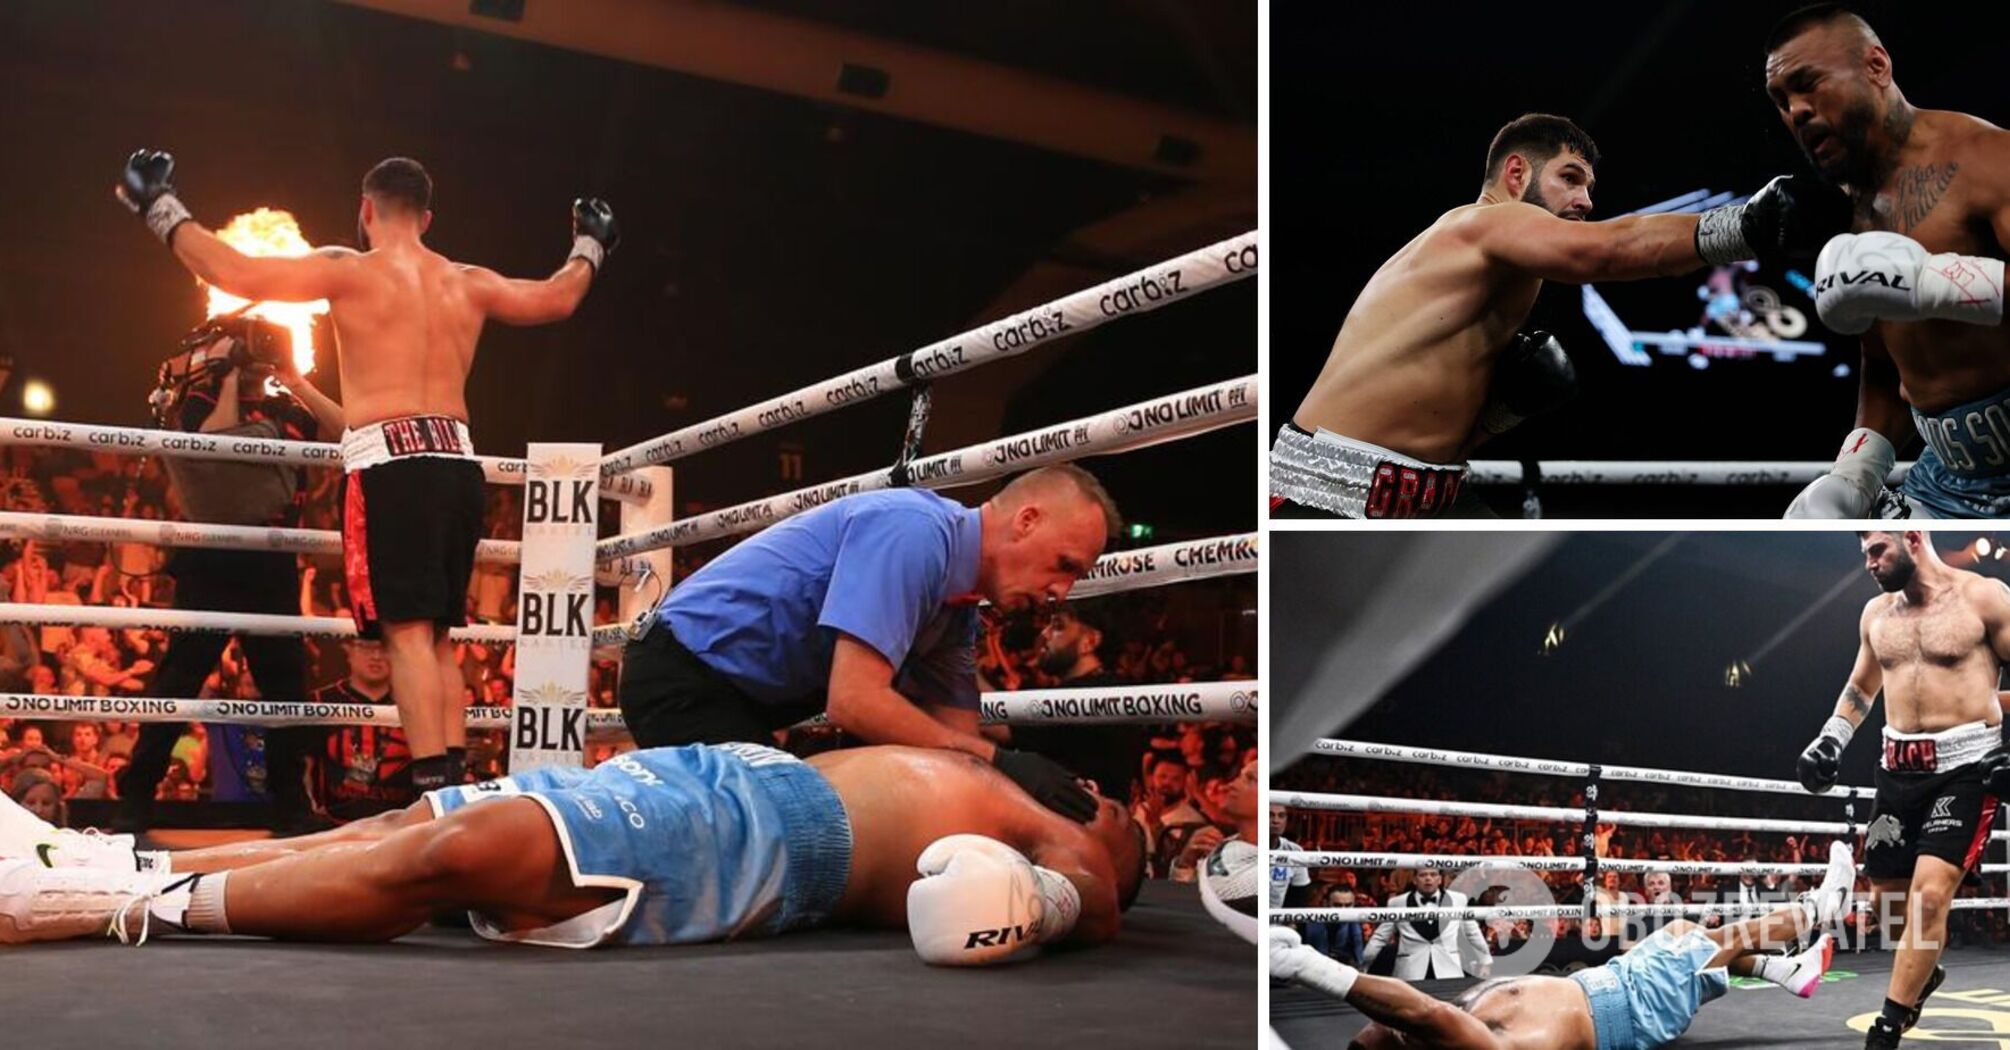 Australian boxer recovers from knockdown and wins the intense fight by 'KO of the year'. Video